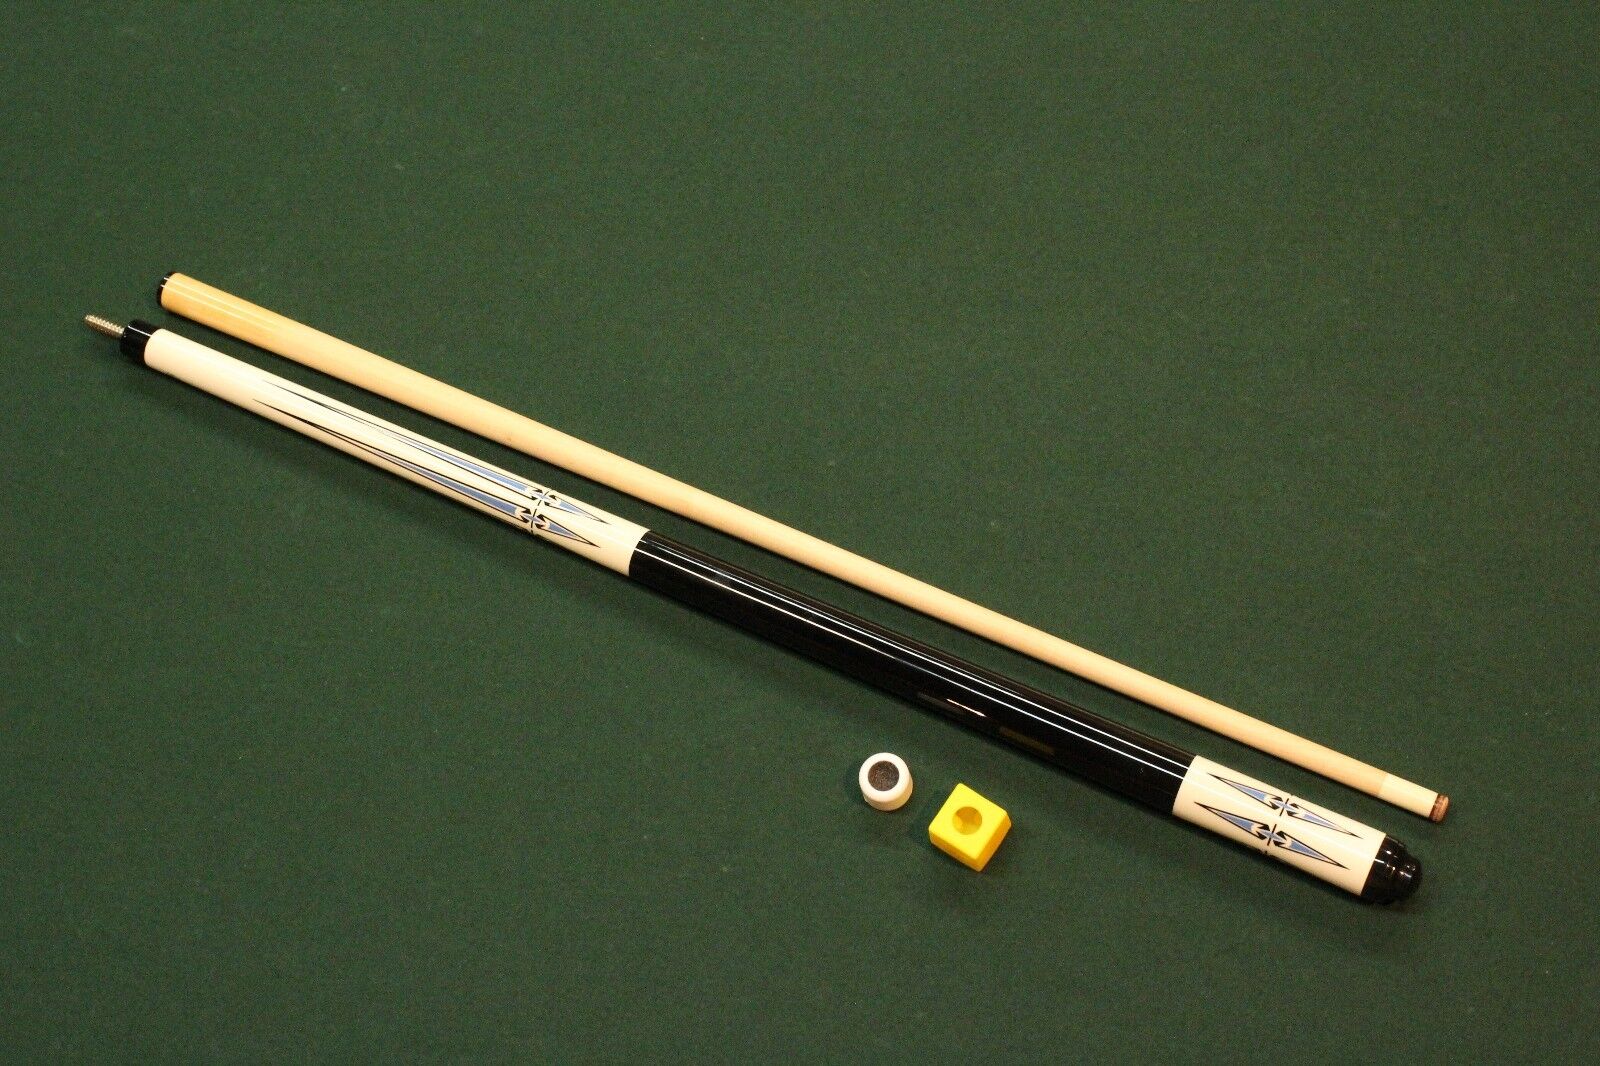 Brand New McDermott Pool Cue with Free Soft Case Accessories Billiards Stick 